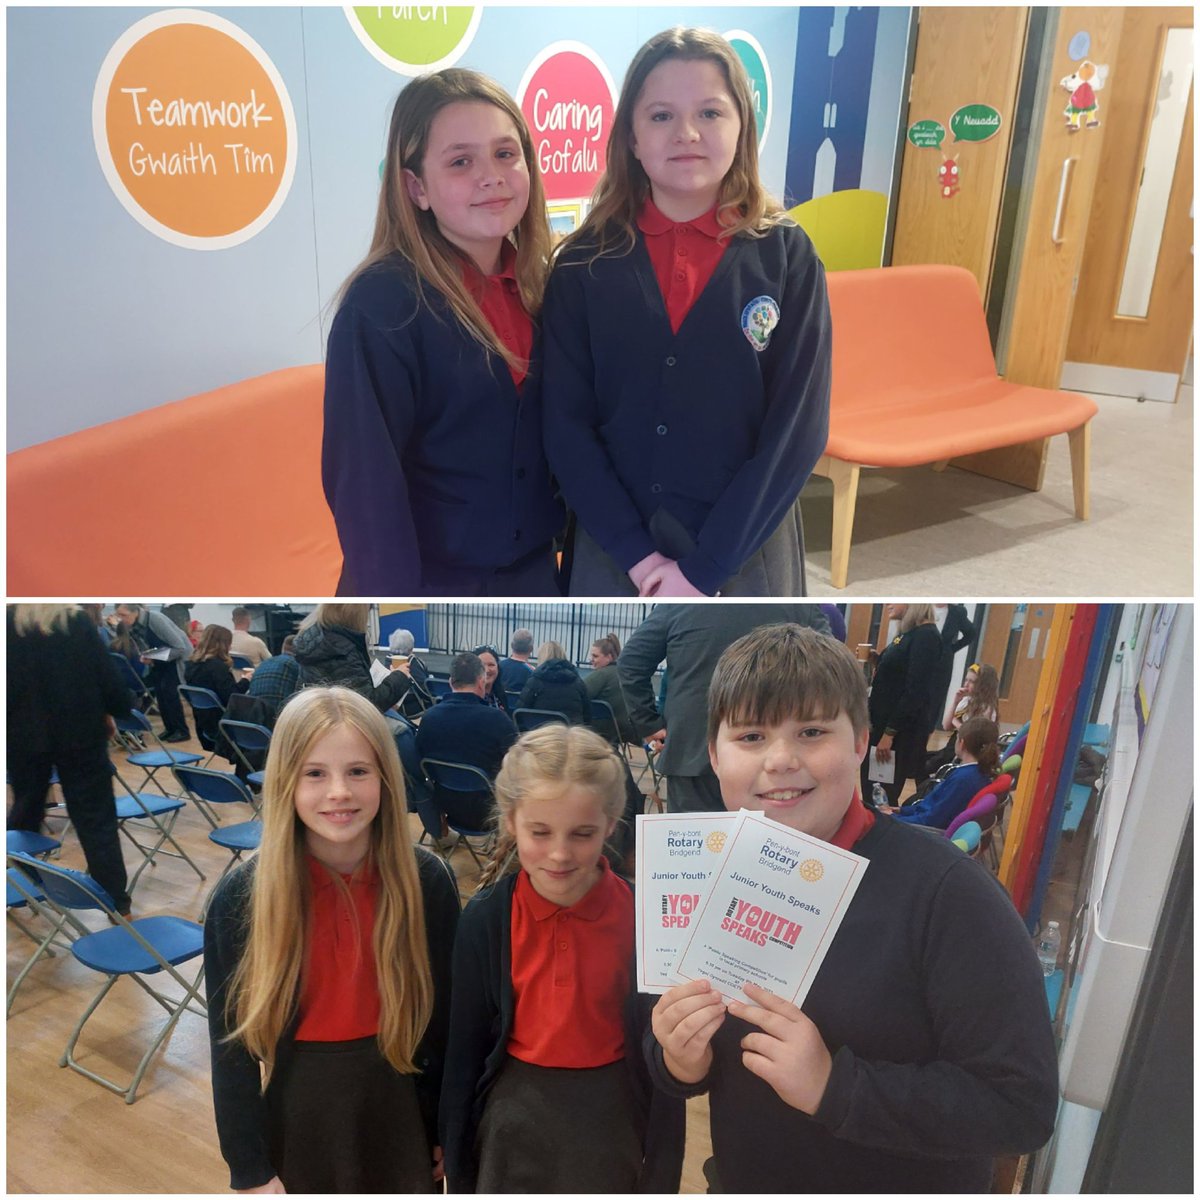 Thank you to our fantastic year 6 Rota Kids - who gave up their time to help at the outstanding Youth Speaks event tonight! You were amazing and an absolute credit to Coety Primary School. 👏
#teamworkmakesthedreamwork #absolutestars #proudofyou